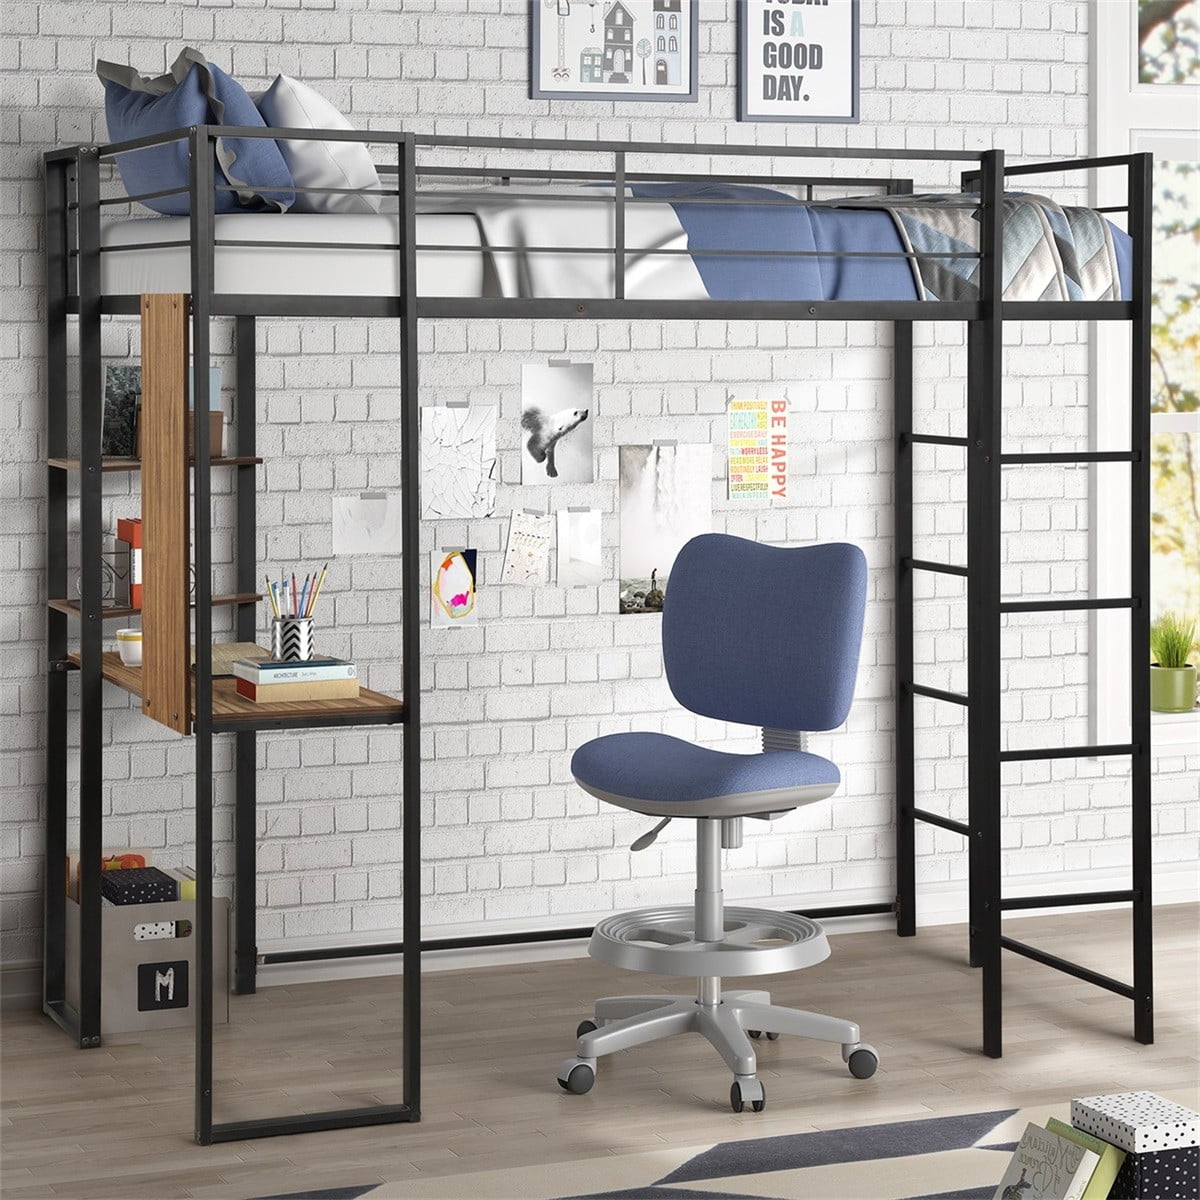 Modernluxe Metal Twin Size Loft Bed, Metal Loft Bed With Desk And Shelves